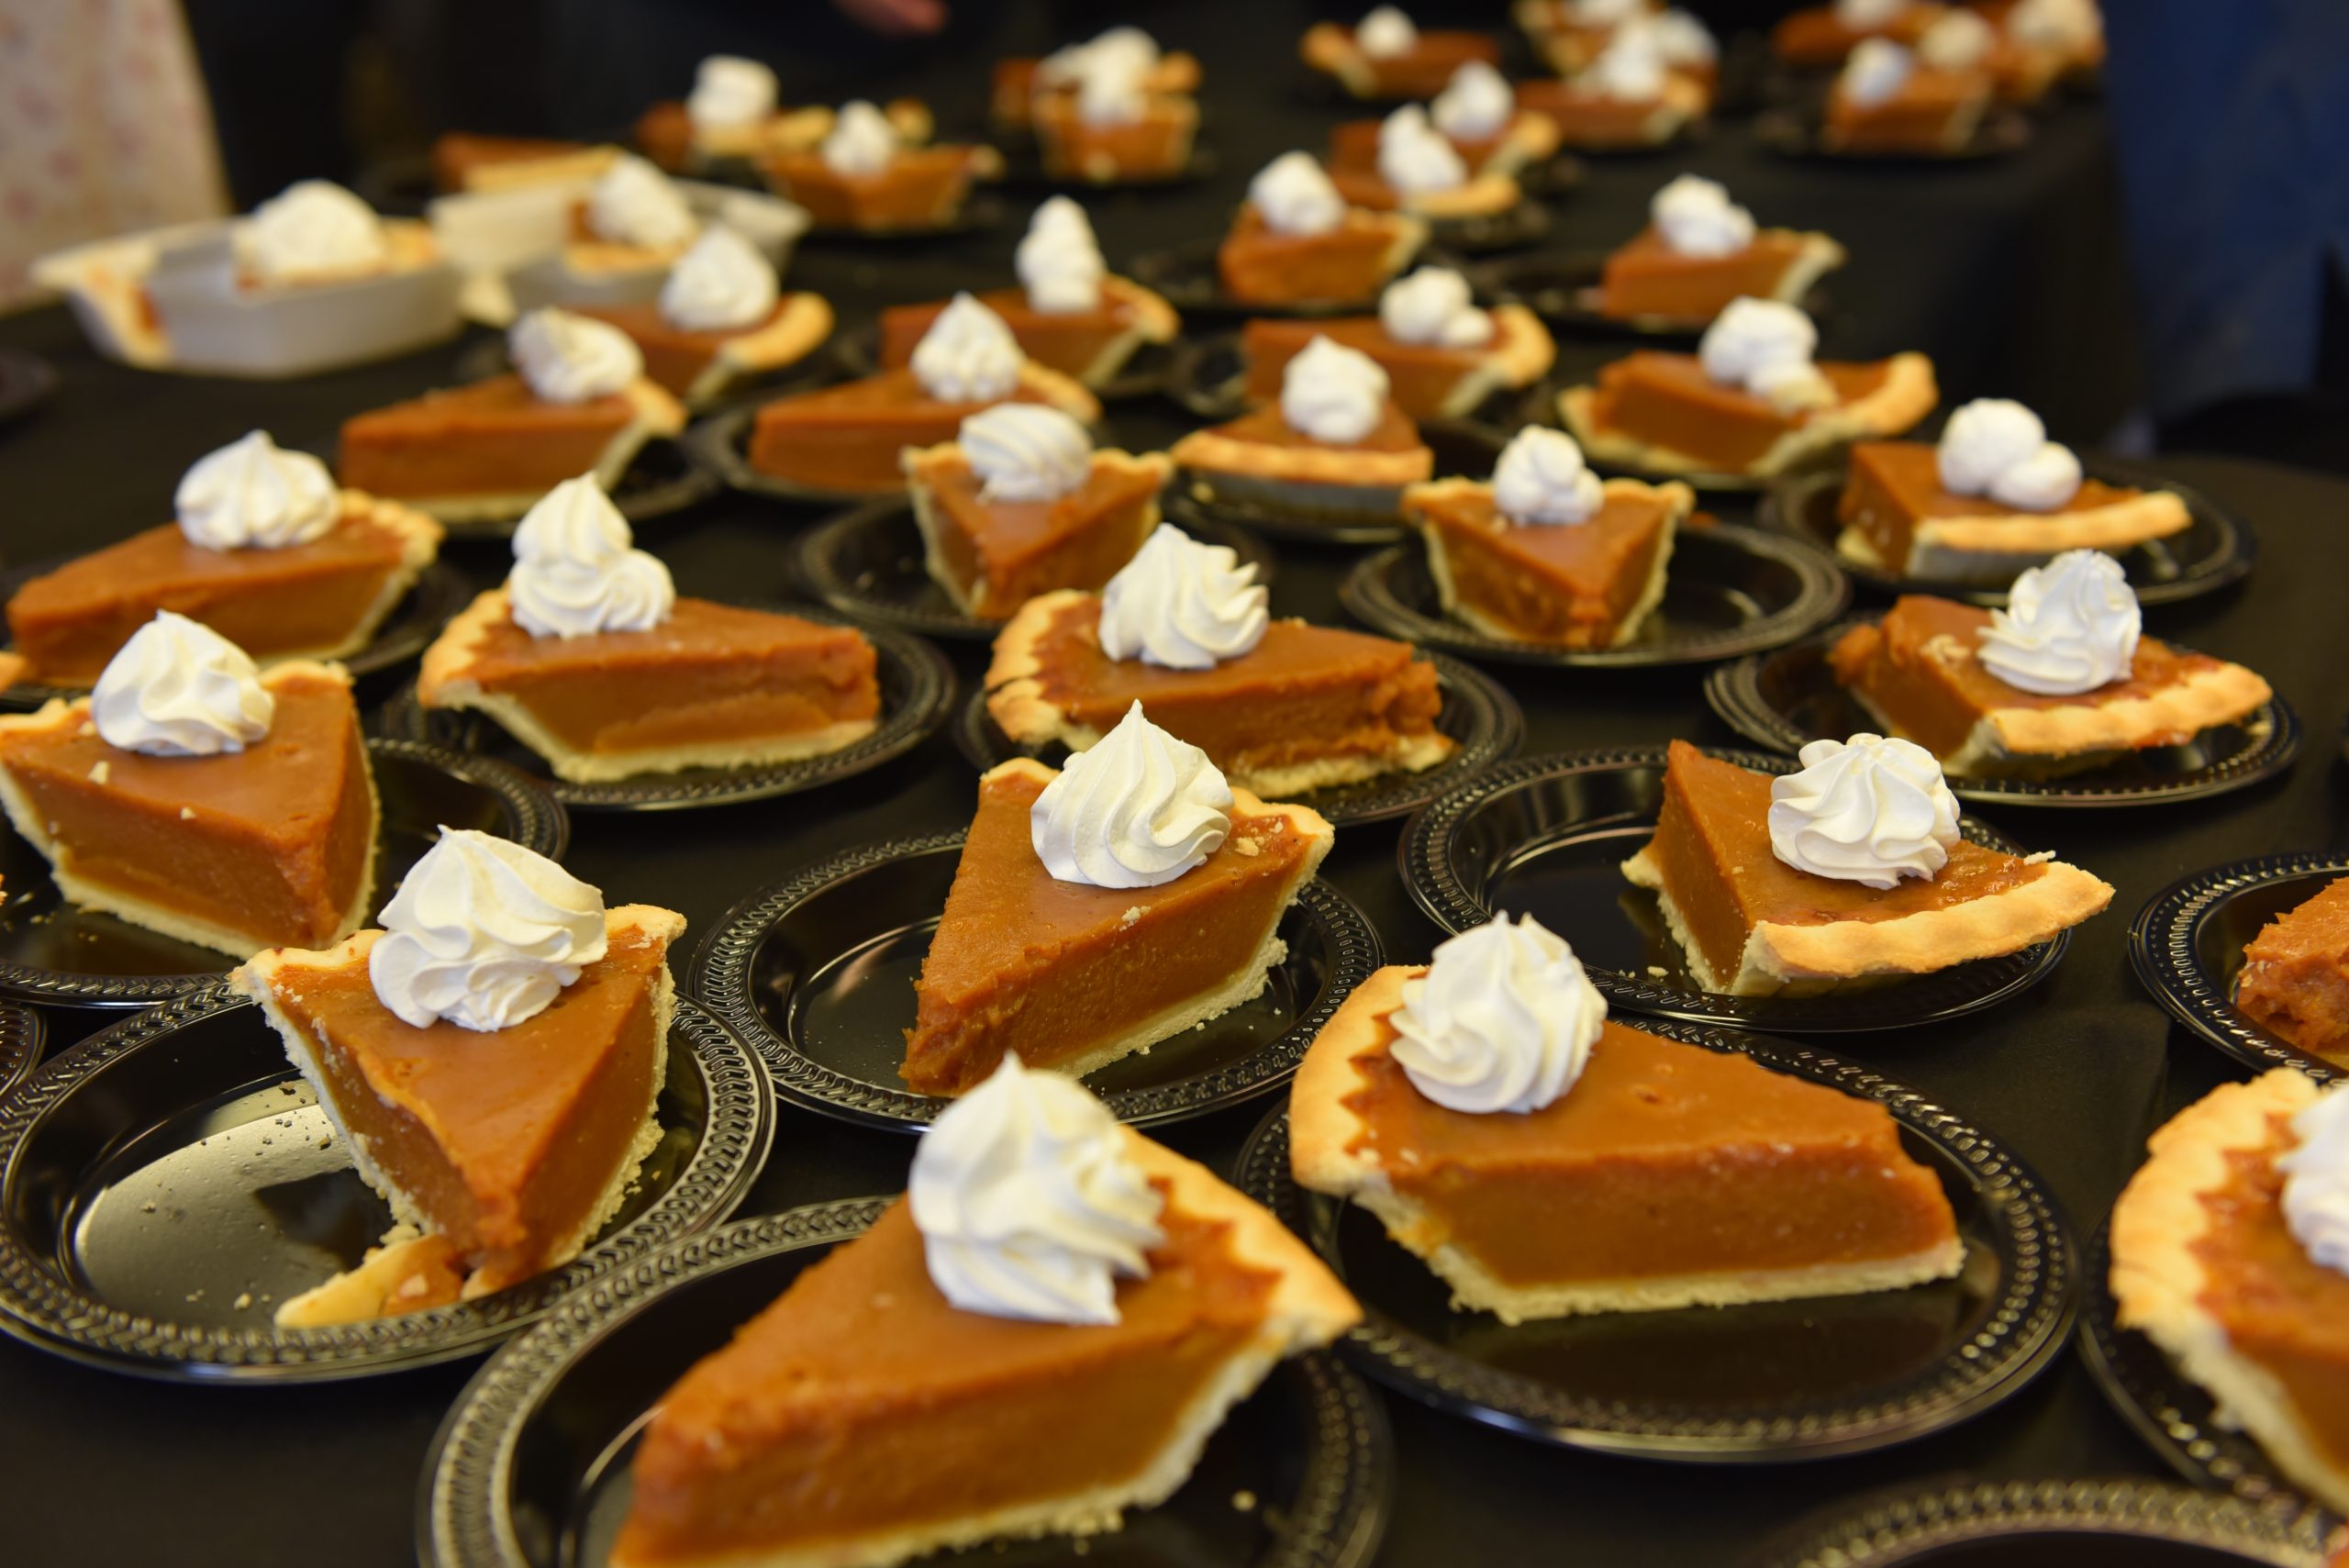 Community Comes Together for Annual Thanksgiving Dinner